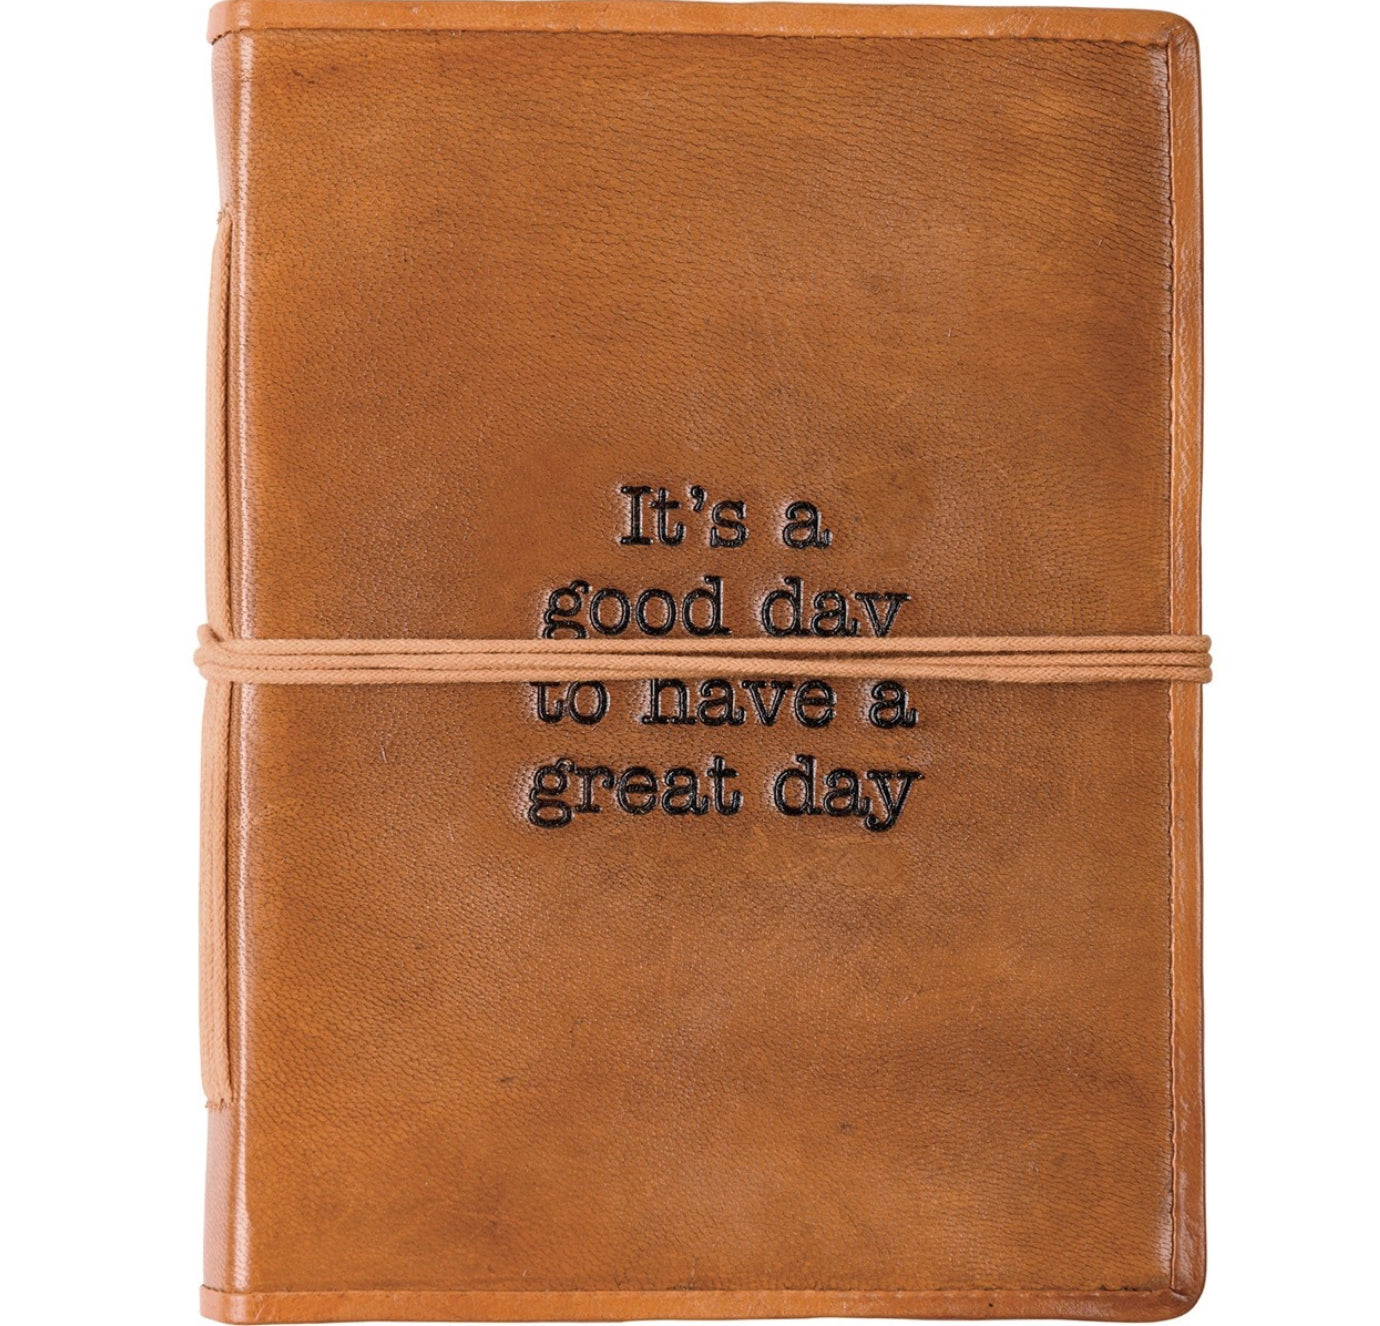 A Good Day To Have A Great Day Journal